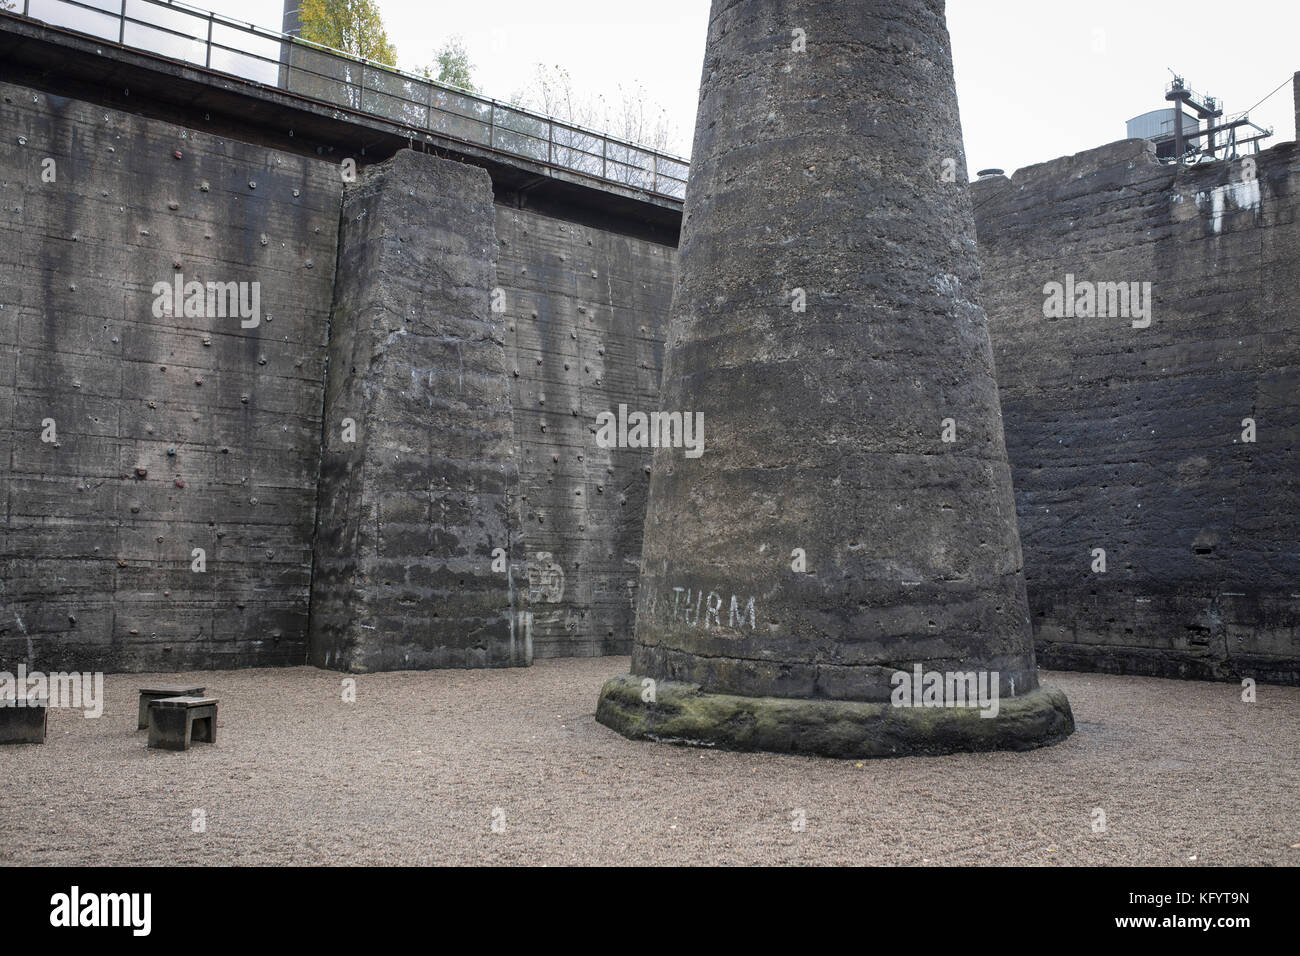 Concrete walls and towers at closed blast furnaces at the Landschaftspark Duisburg in Germany Stock Photo